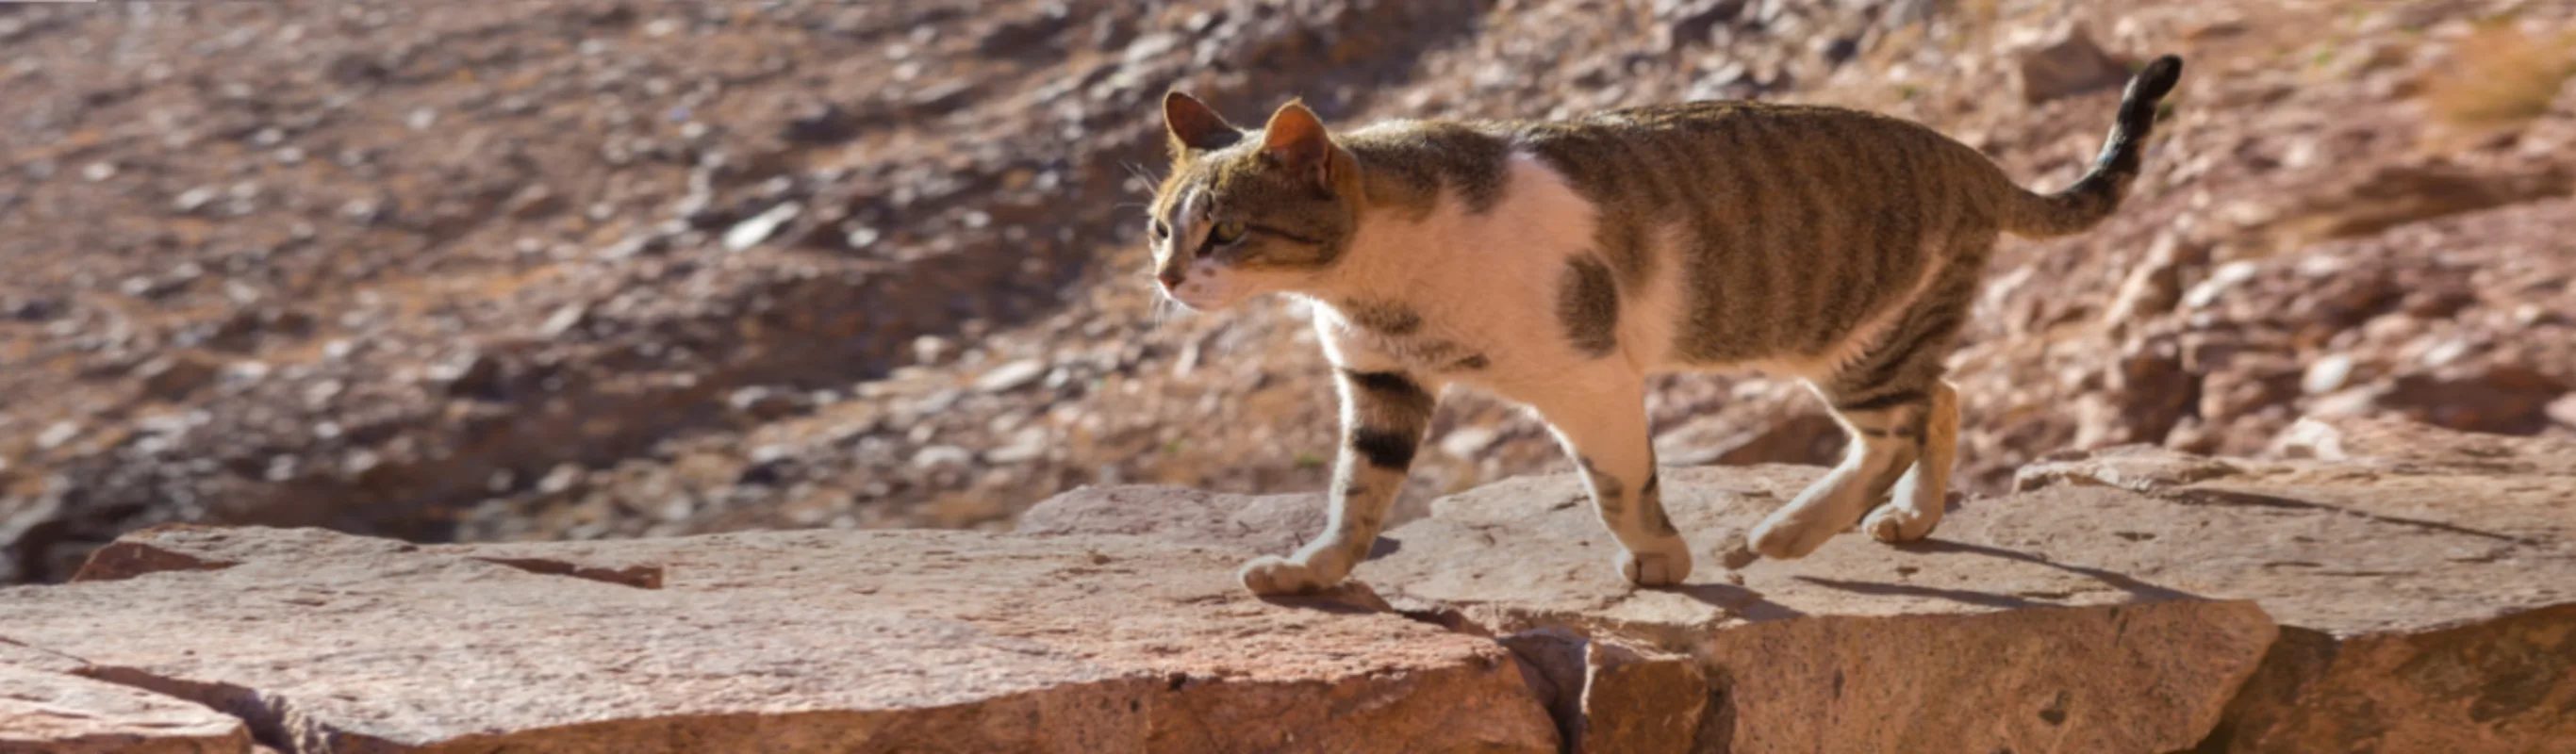 Brown Cat Walking on a Brick Wall in the Desert